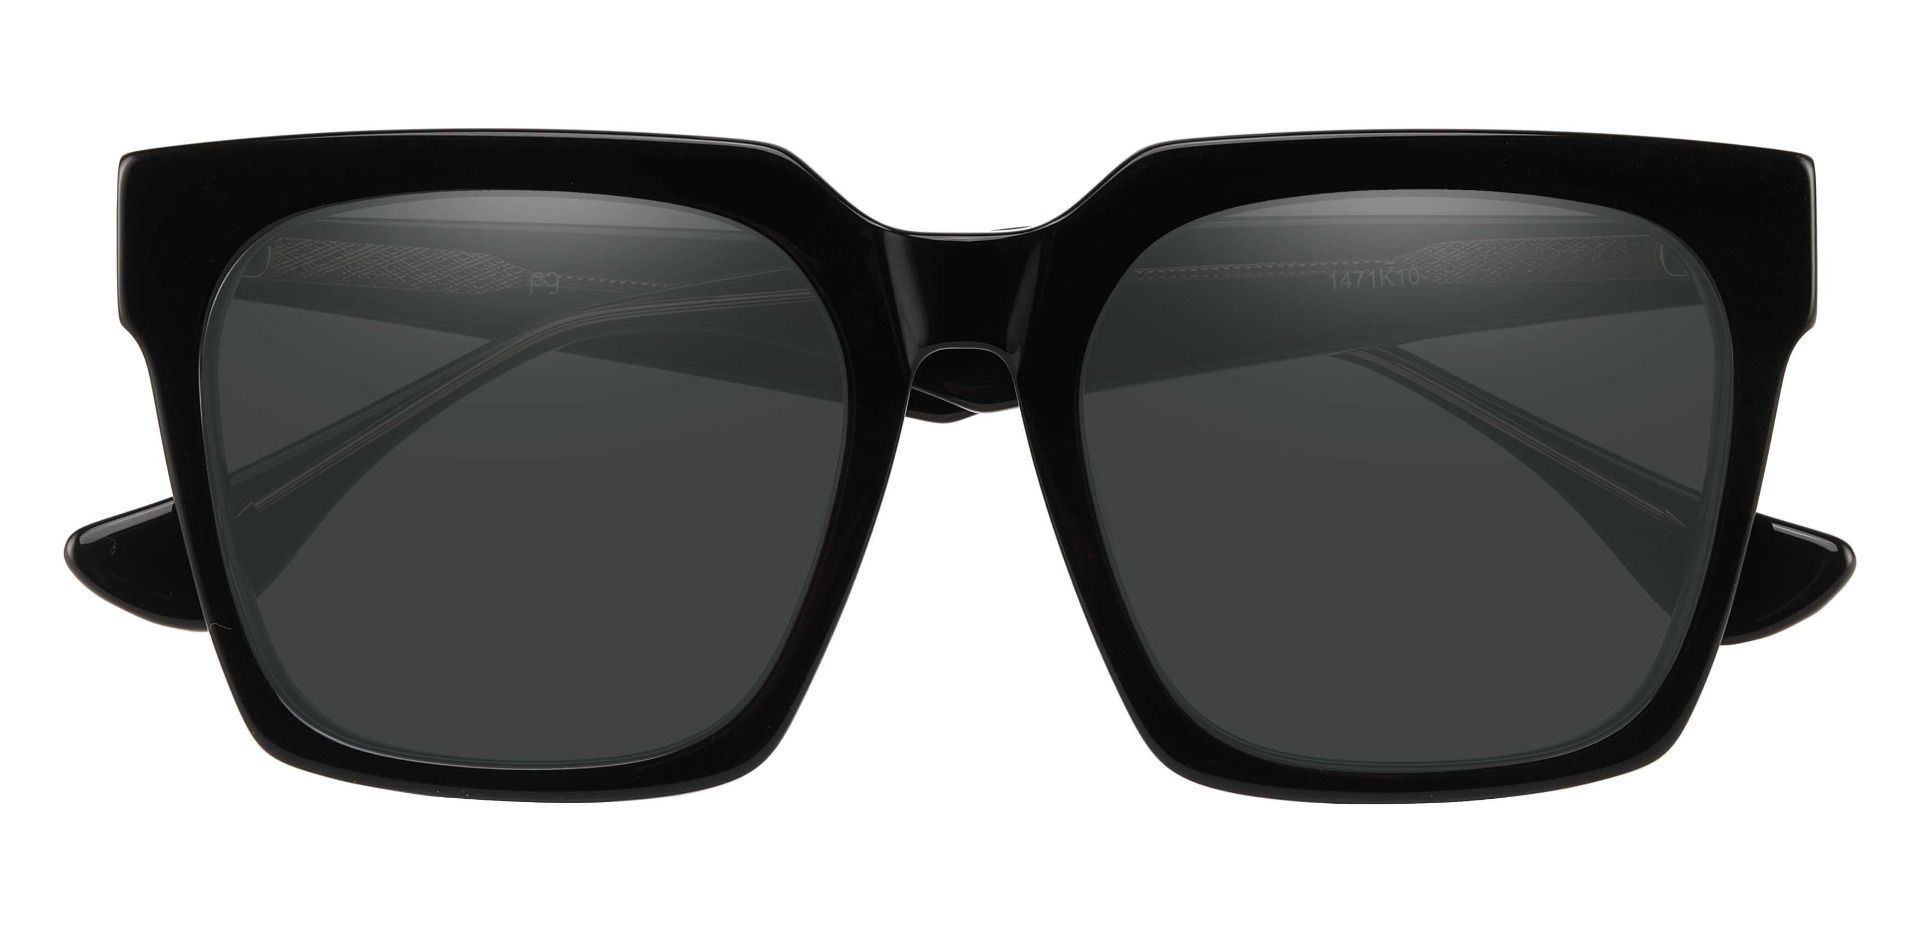 Harlan Square Lined Bifocal Sunglasses - Black Frame With Gray Lenses